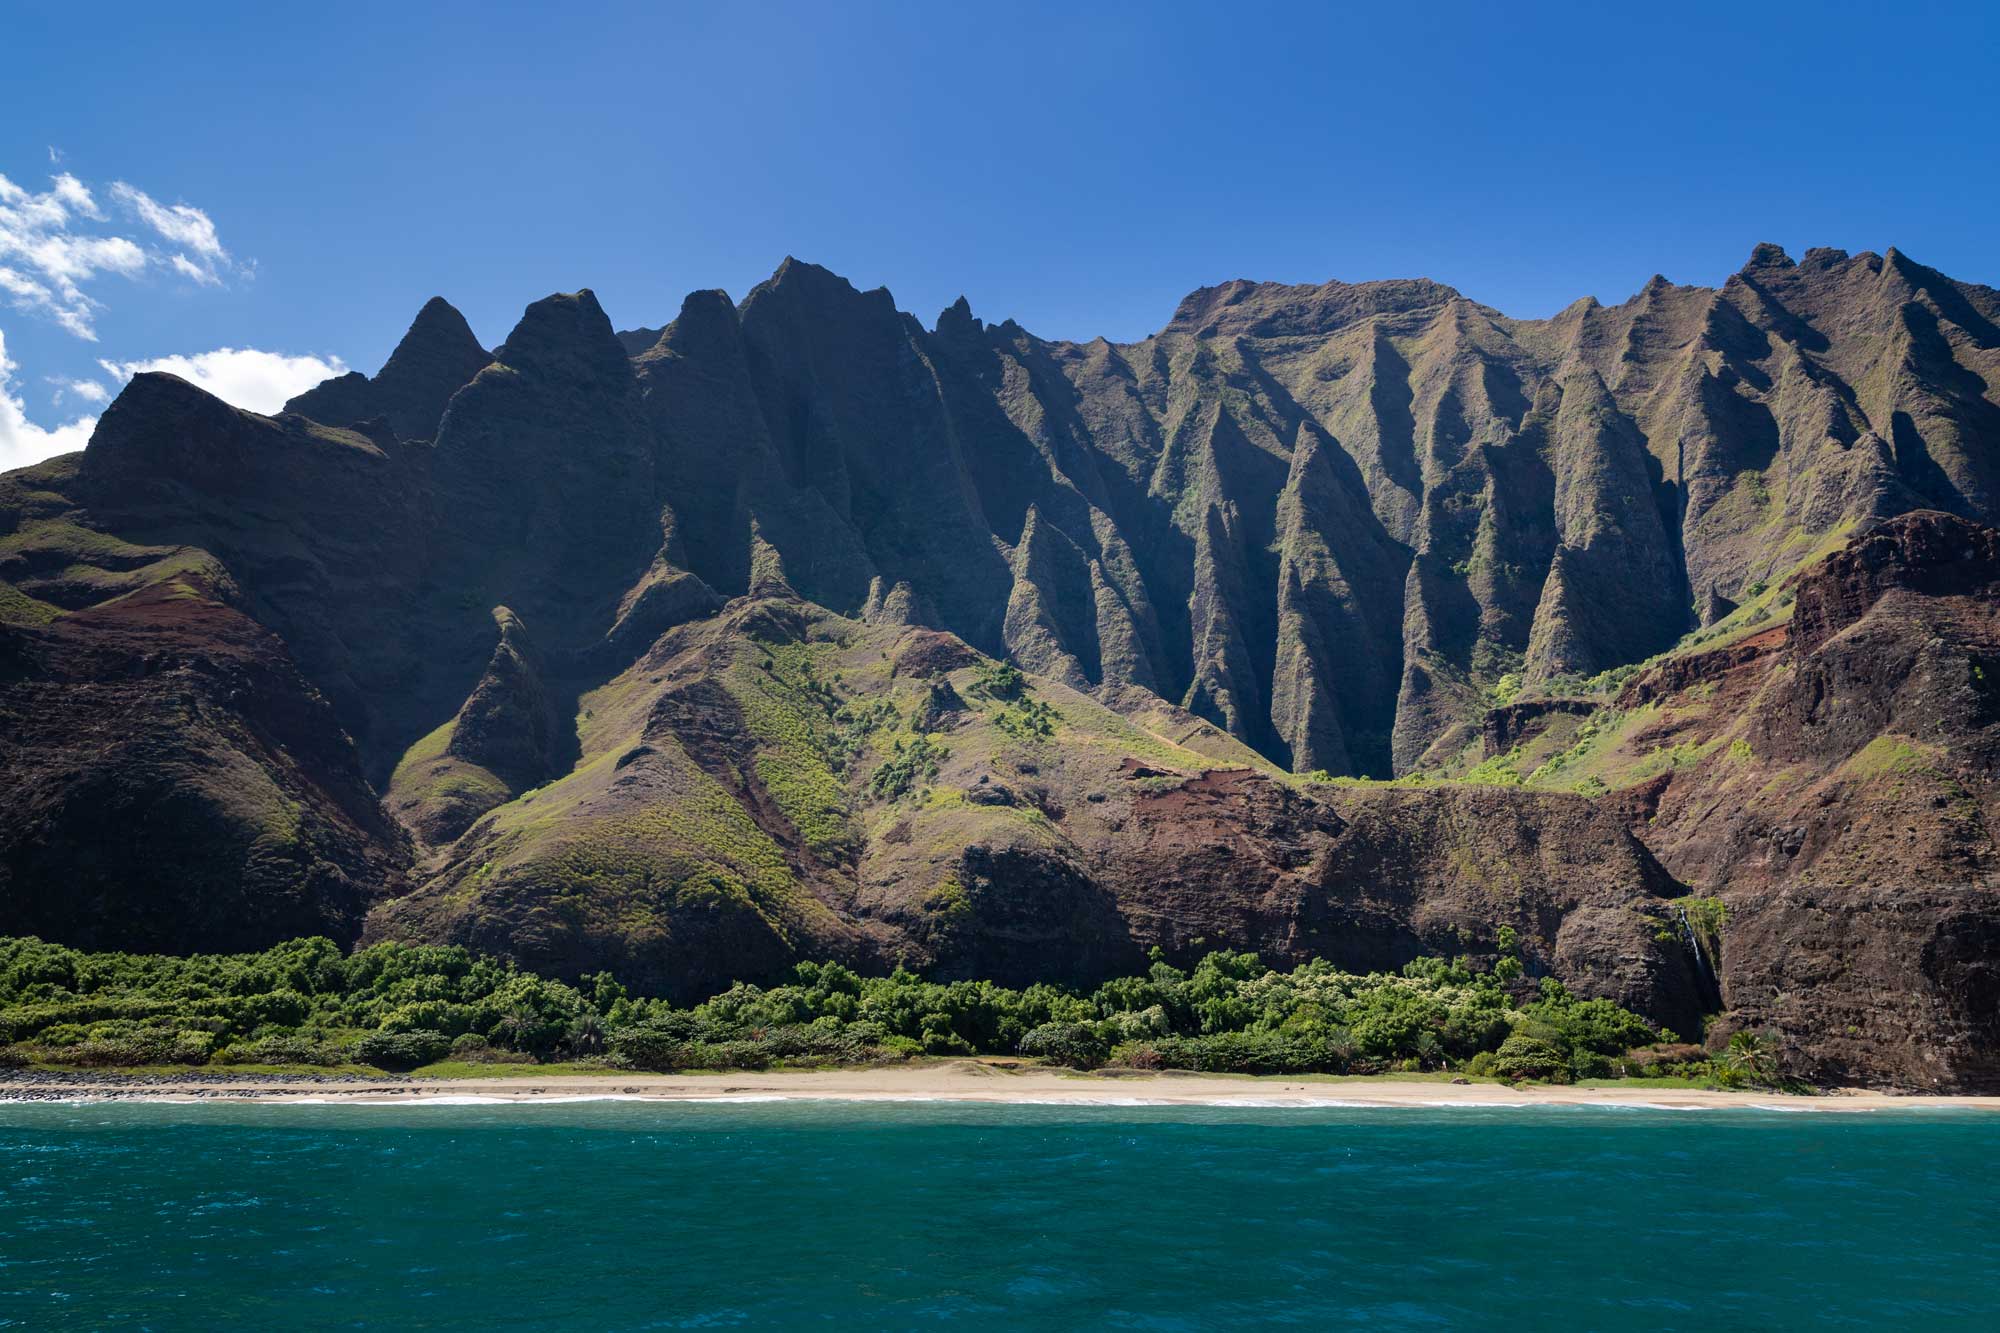 Photograph of the coast of Kaua'i showing deeply eroded, steep cliffs.